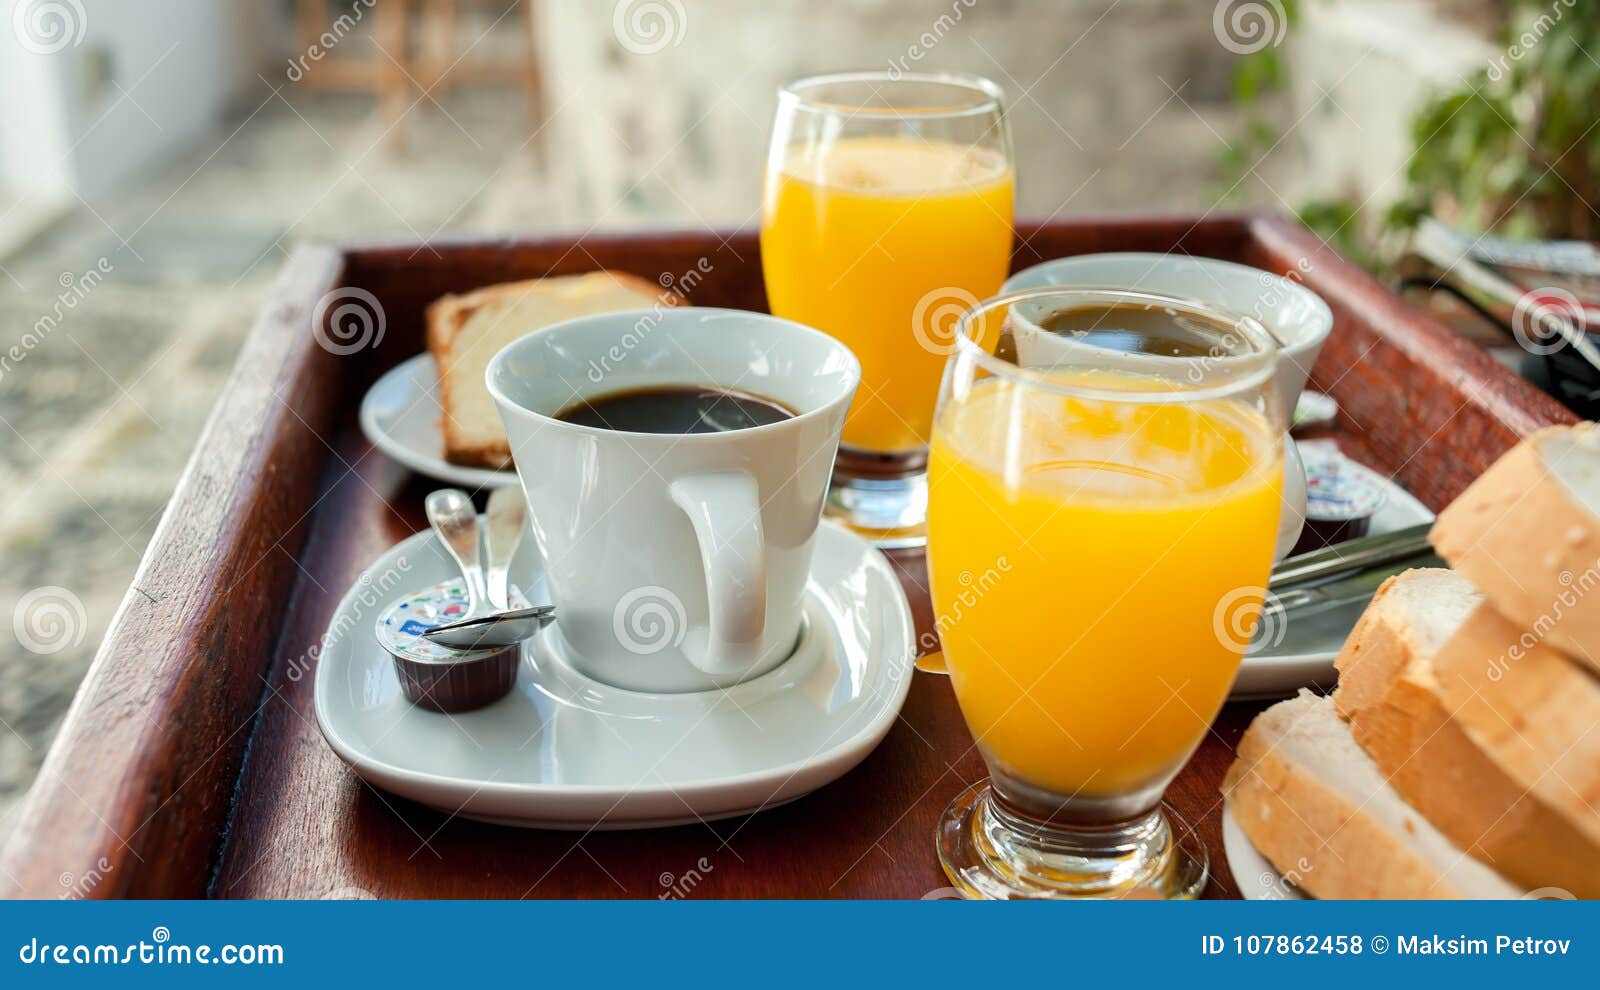 orange juice and coffee as a part of a continental breakfast